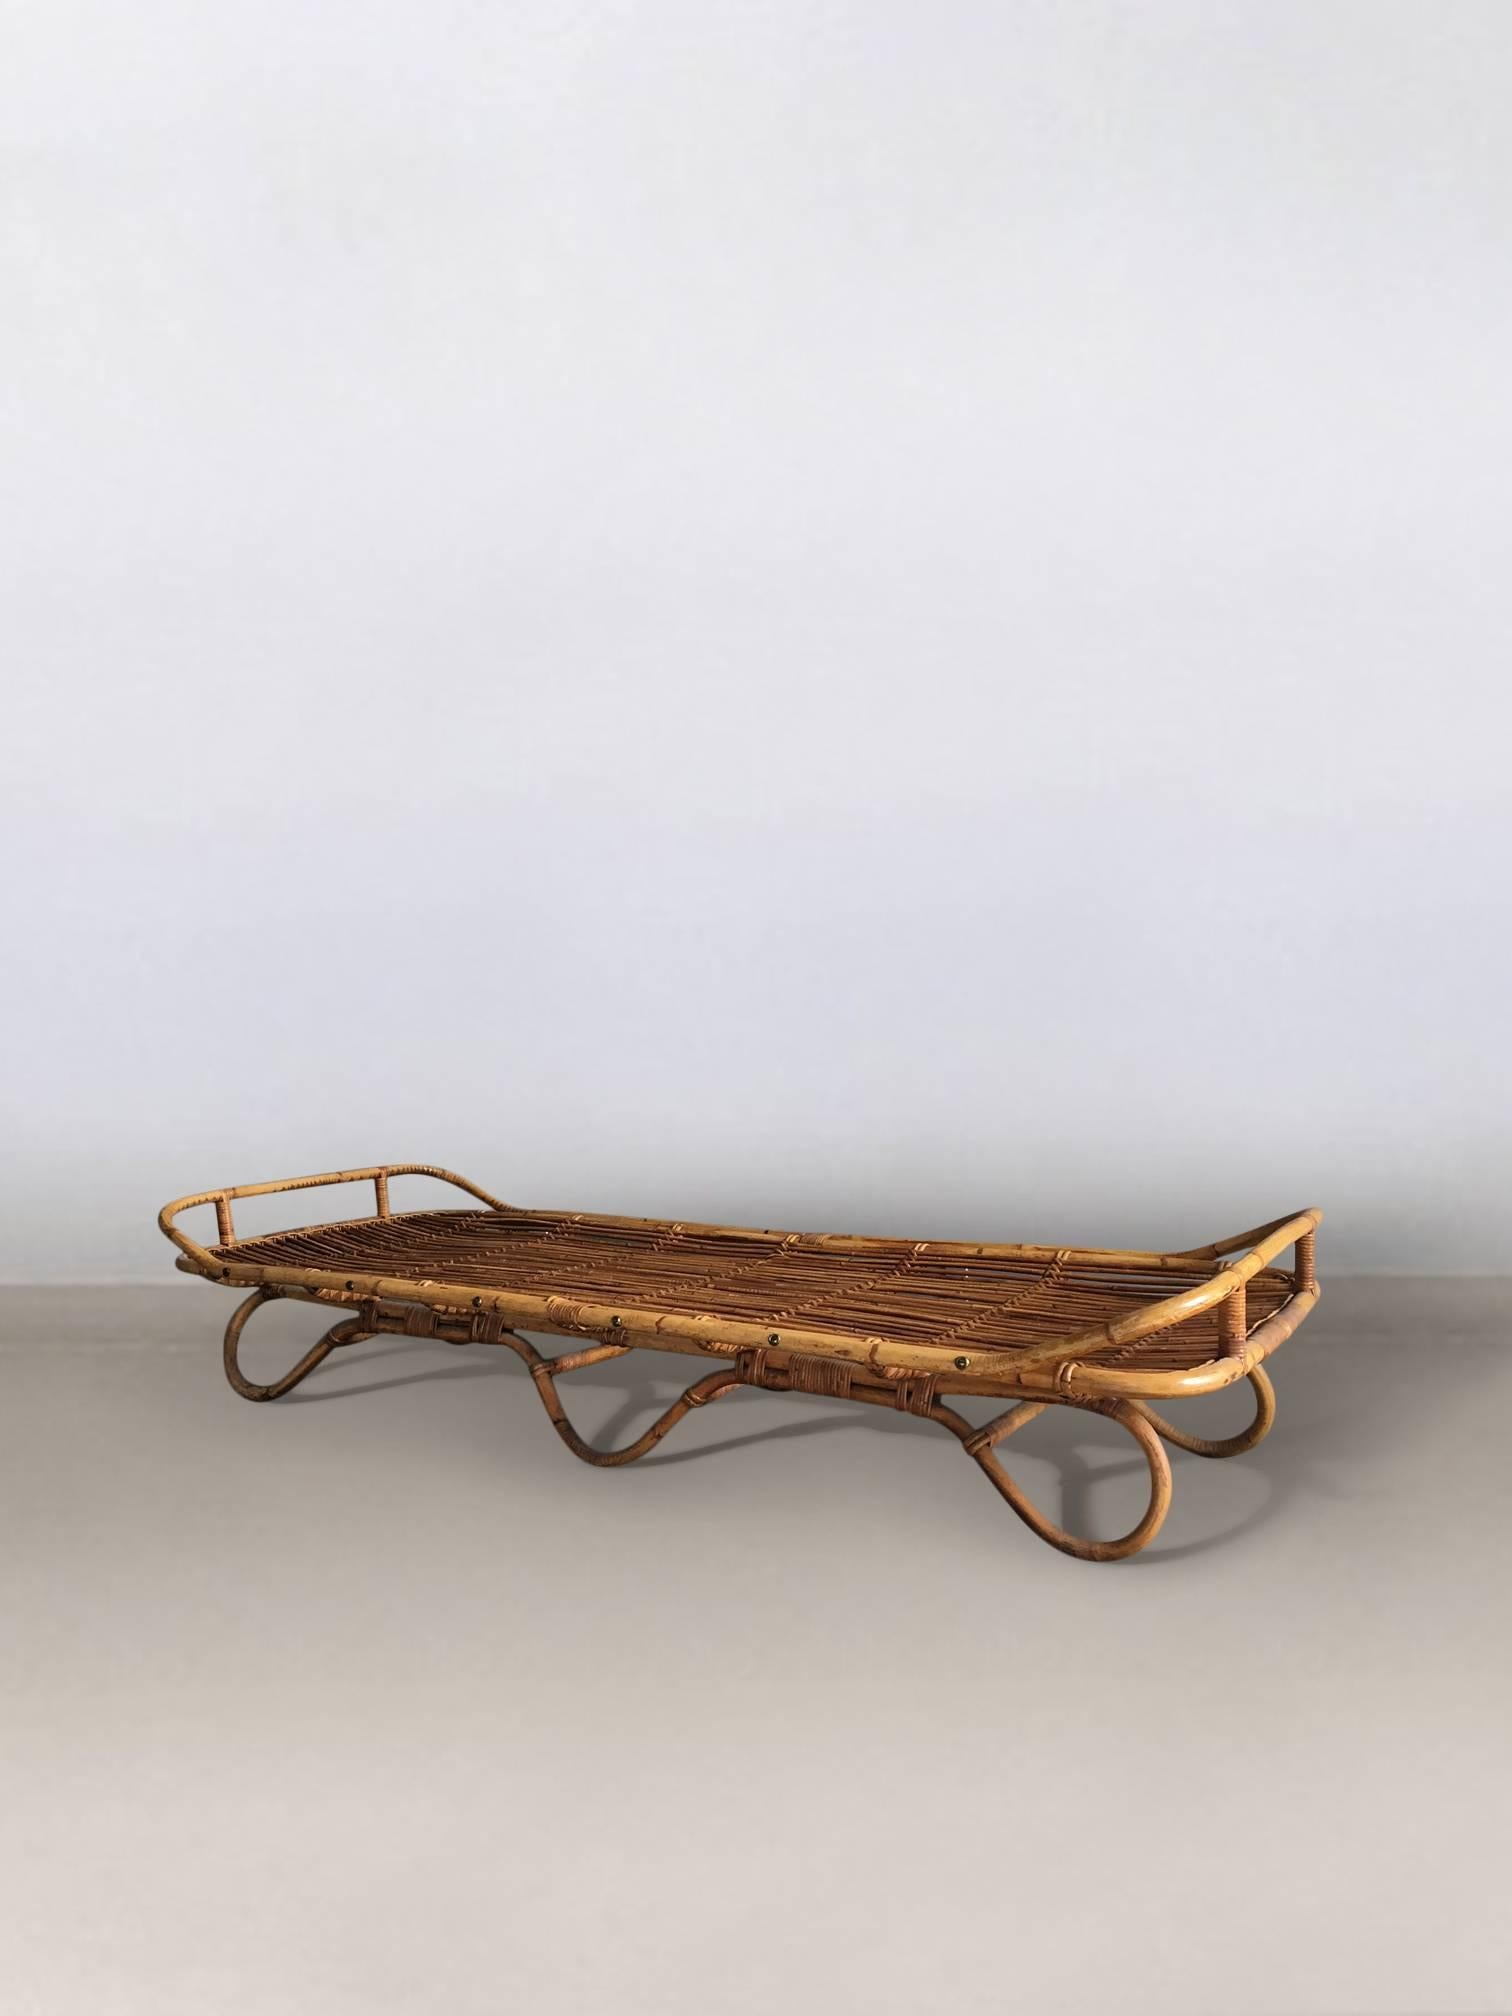 Not very often, we find 'jewels' like this!
This beautifully designed daybed was manufactured in the Netherlands, most likely by Rohé Noordwolde.
It features a rattan frame with great organic shapes. This daybed remains in a very good condition